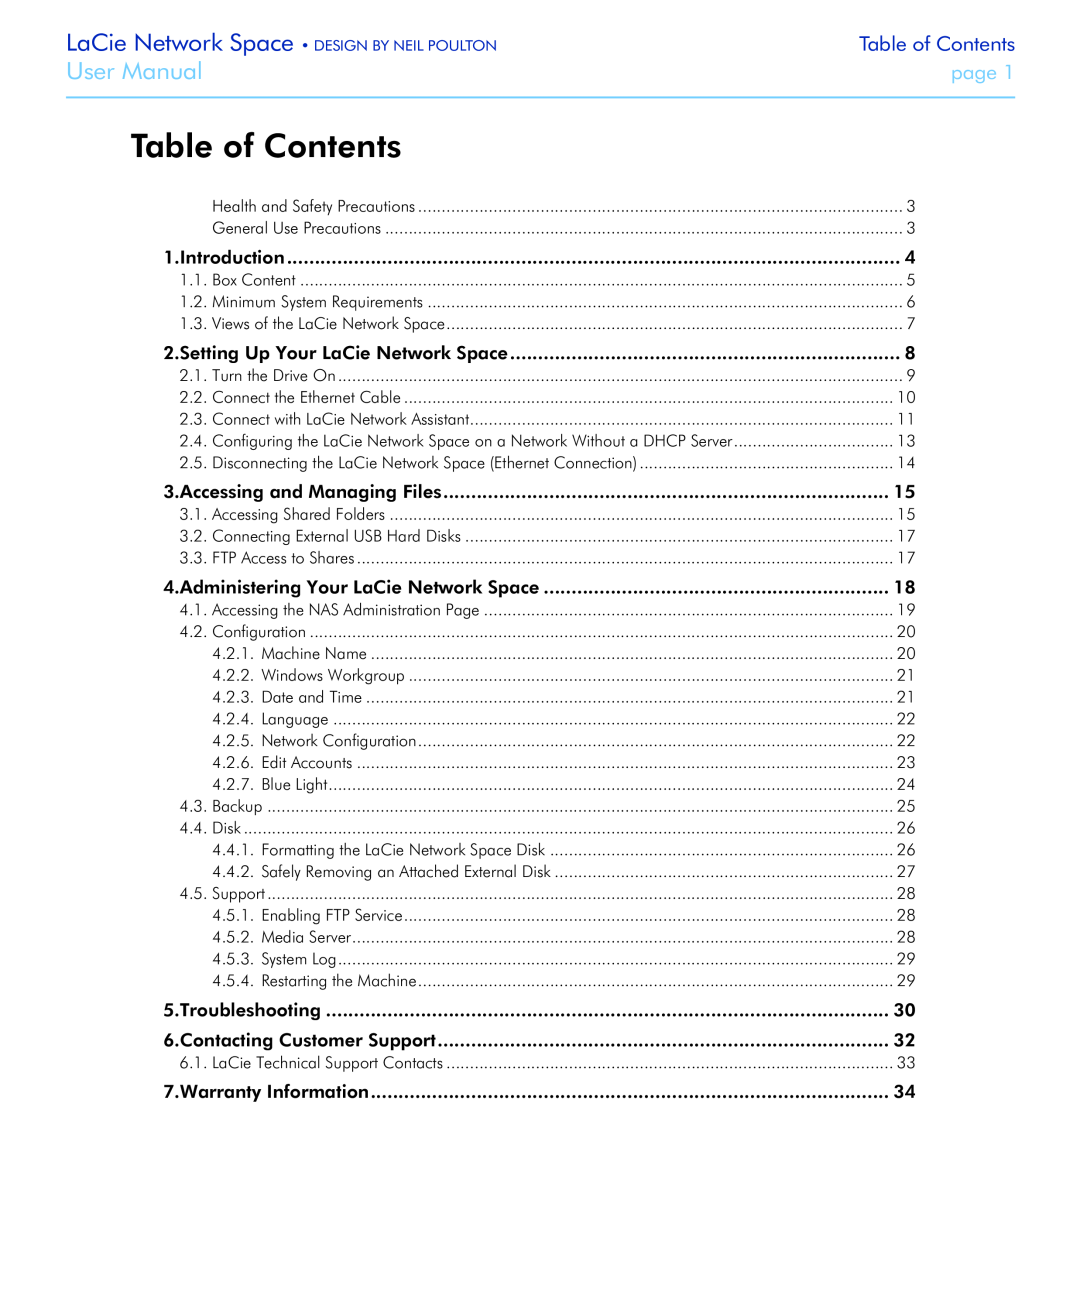 LaCie Network Space user manual Table of Contents, User Manual, page, Accessing and Managing Files, Troubleshooting 